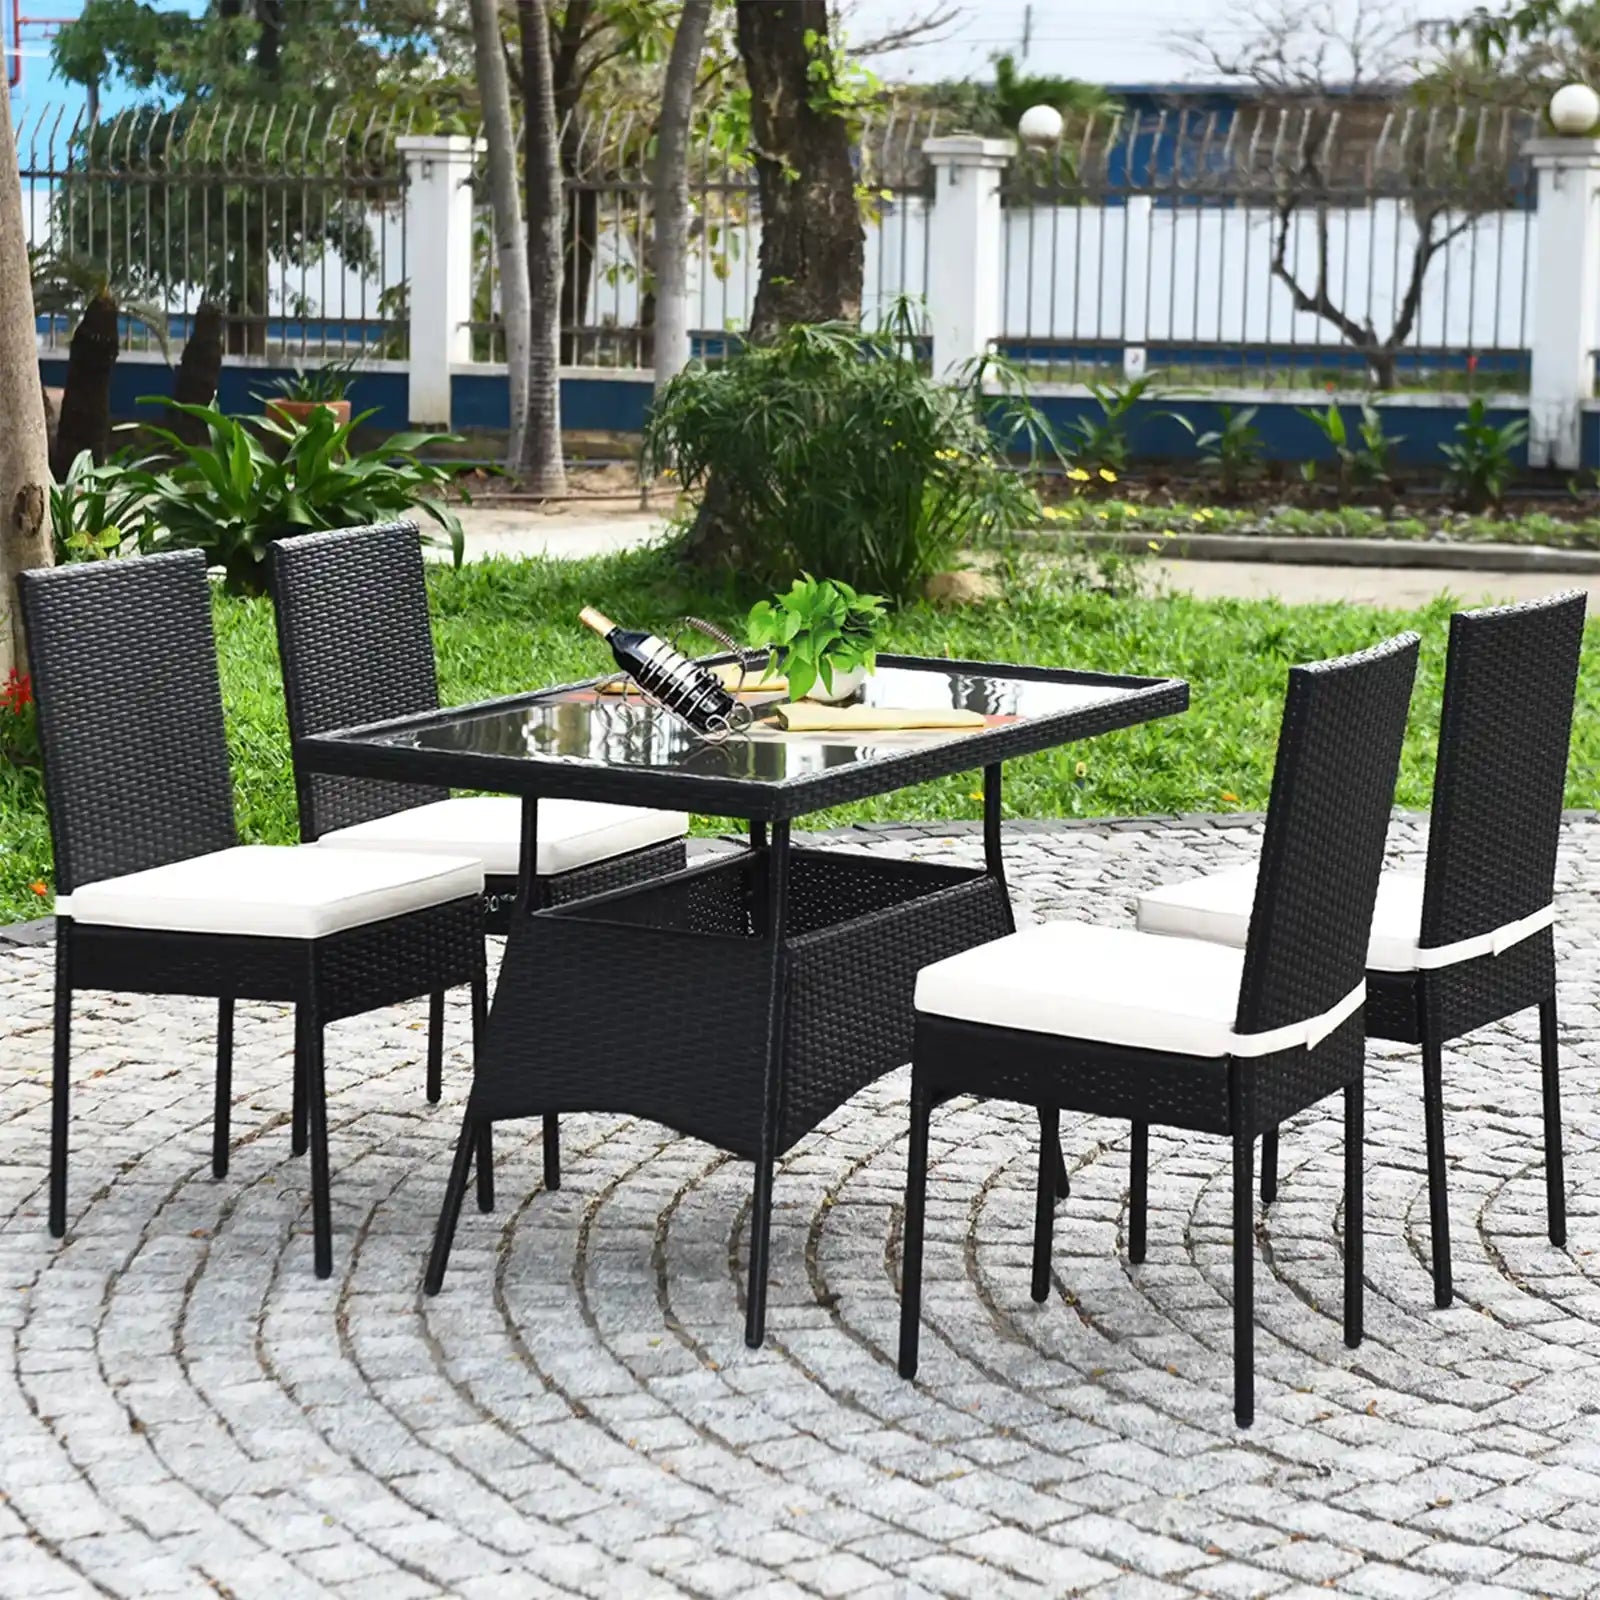 5 Pieces Patio Dining Set Rattan Wicker Chairs and Table with Glass Top